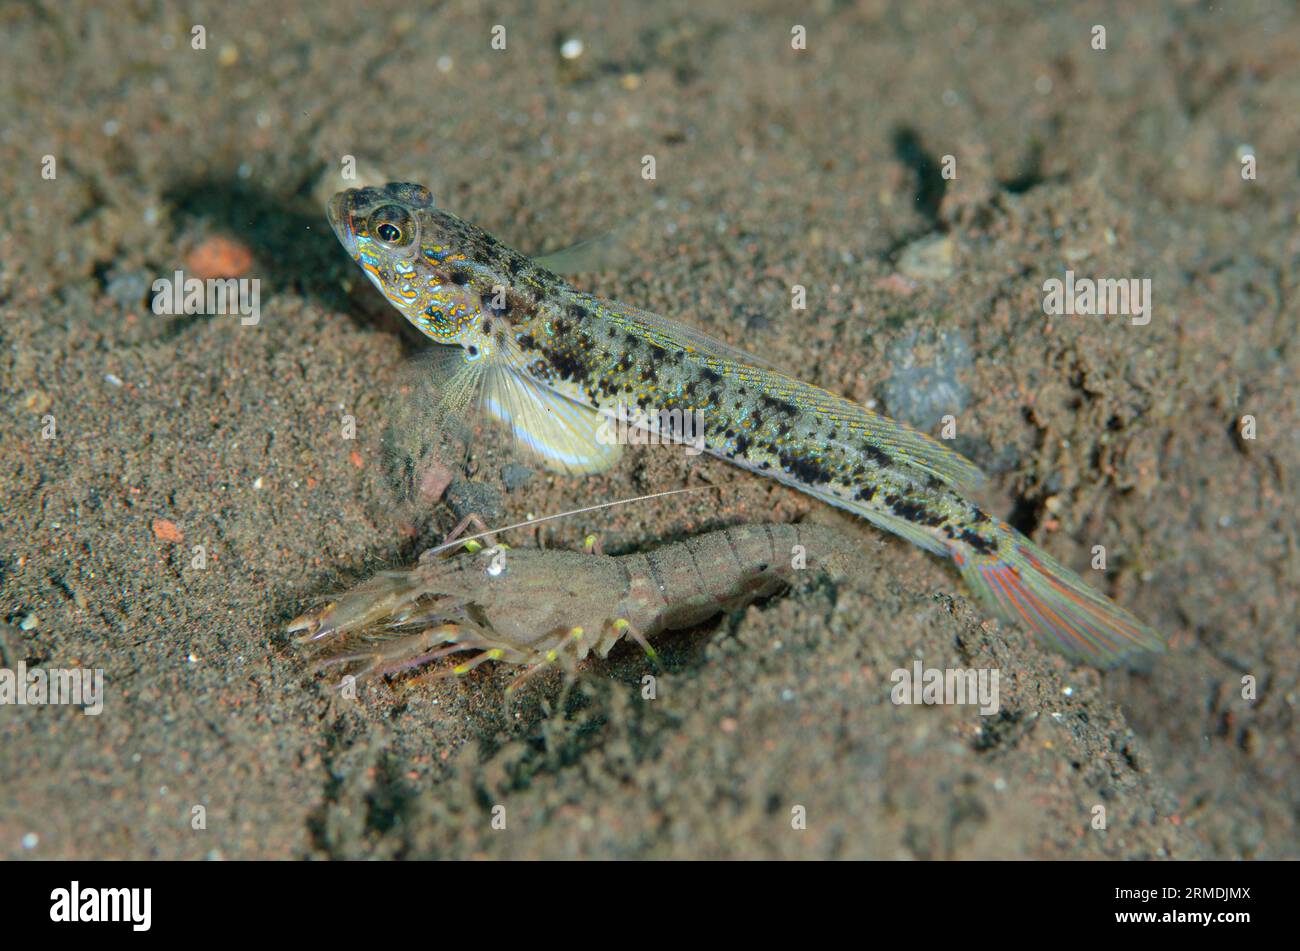 Yellowfoot Shrimpgoby, Valenciennea phaeosticta, with Snapping Shrimp, Alpheus sp, by hole in sand, Pong Pong dive site, Seraya, Karangasem, Bali, Ind Stock Photo